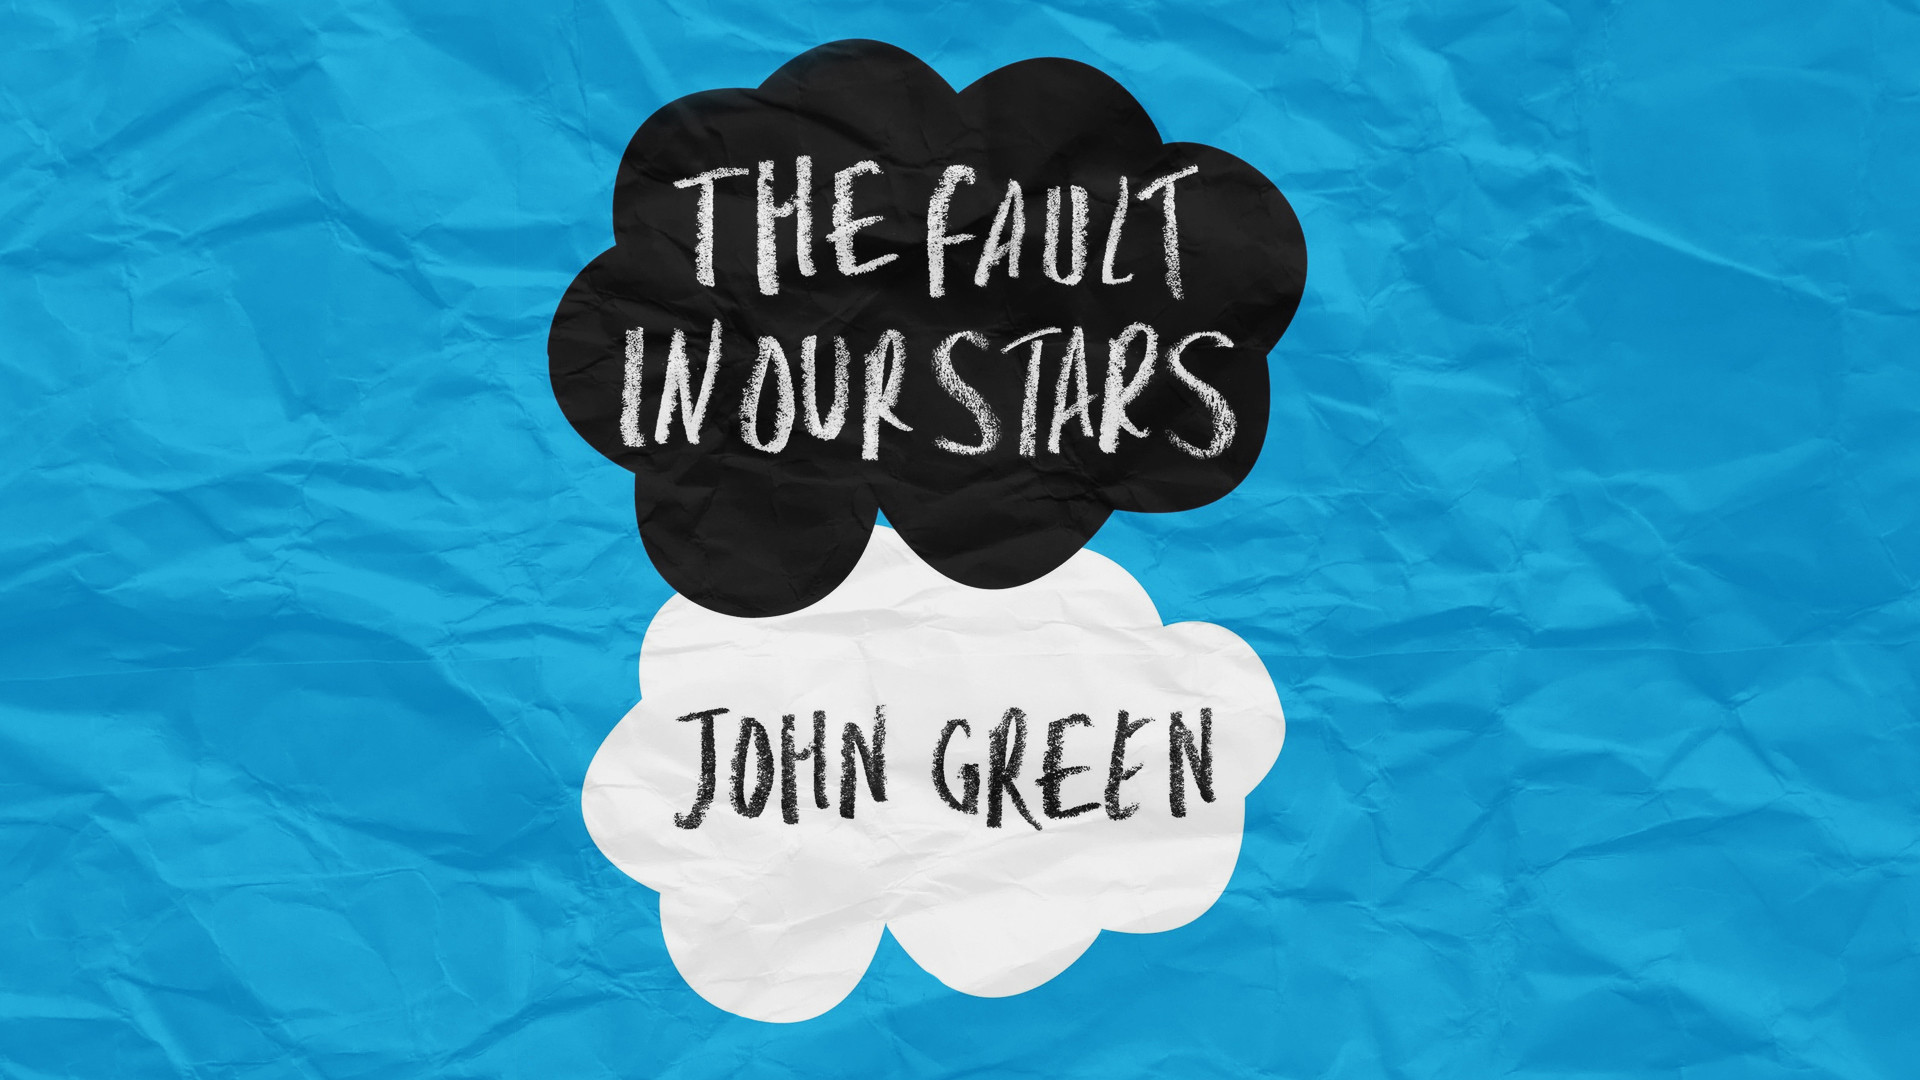 The Fault In Our Stars john green